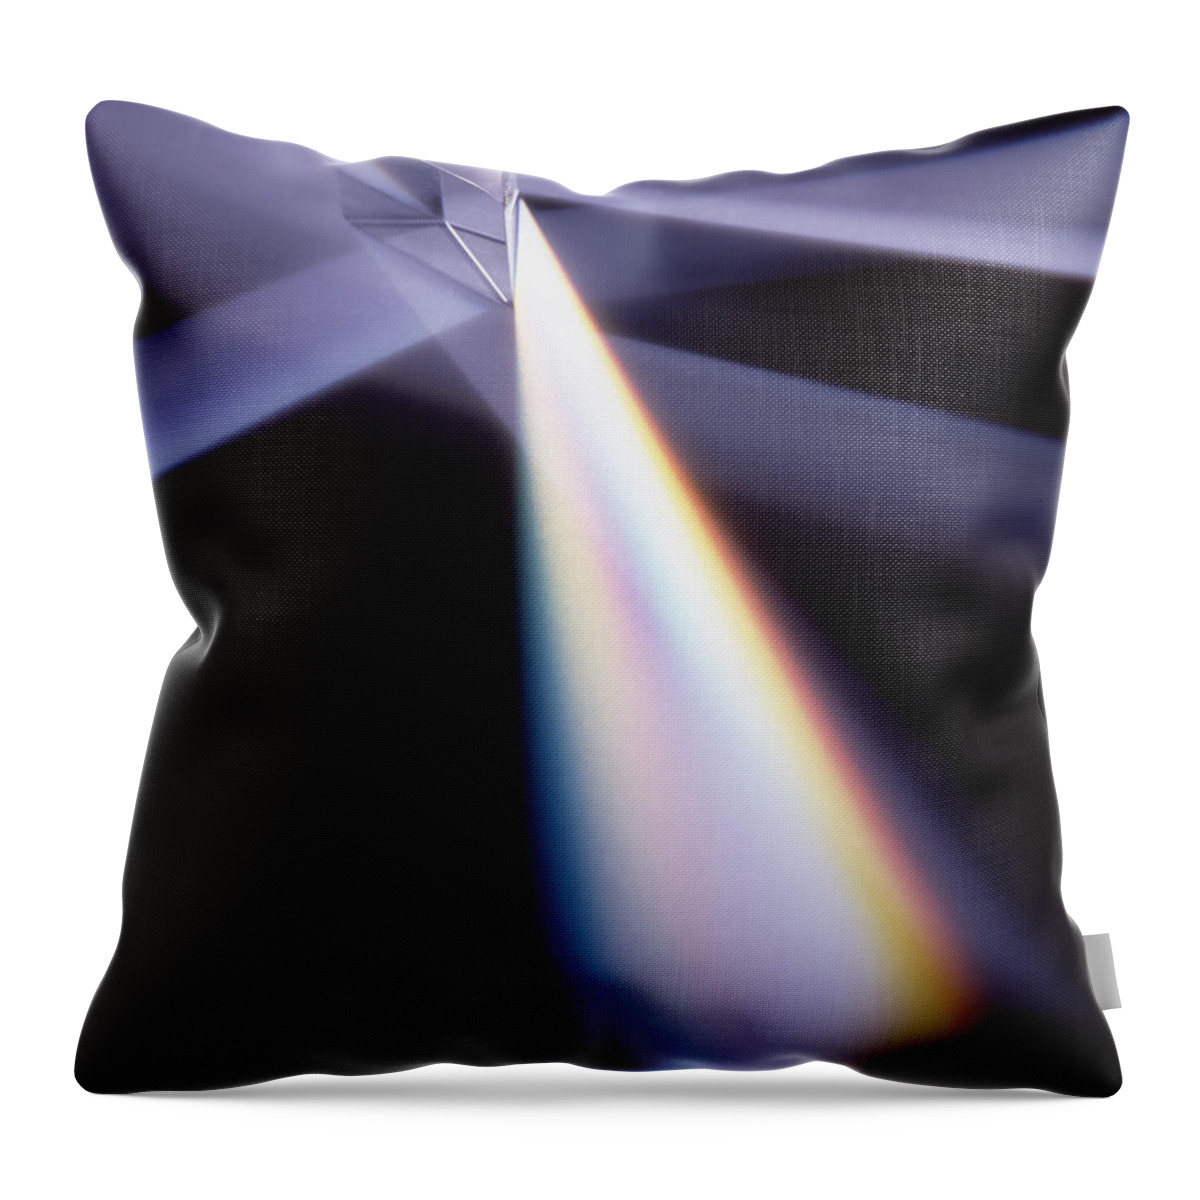 Photo Decor Throw Pillow featuring the photograph Refraction by Steven Huszar